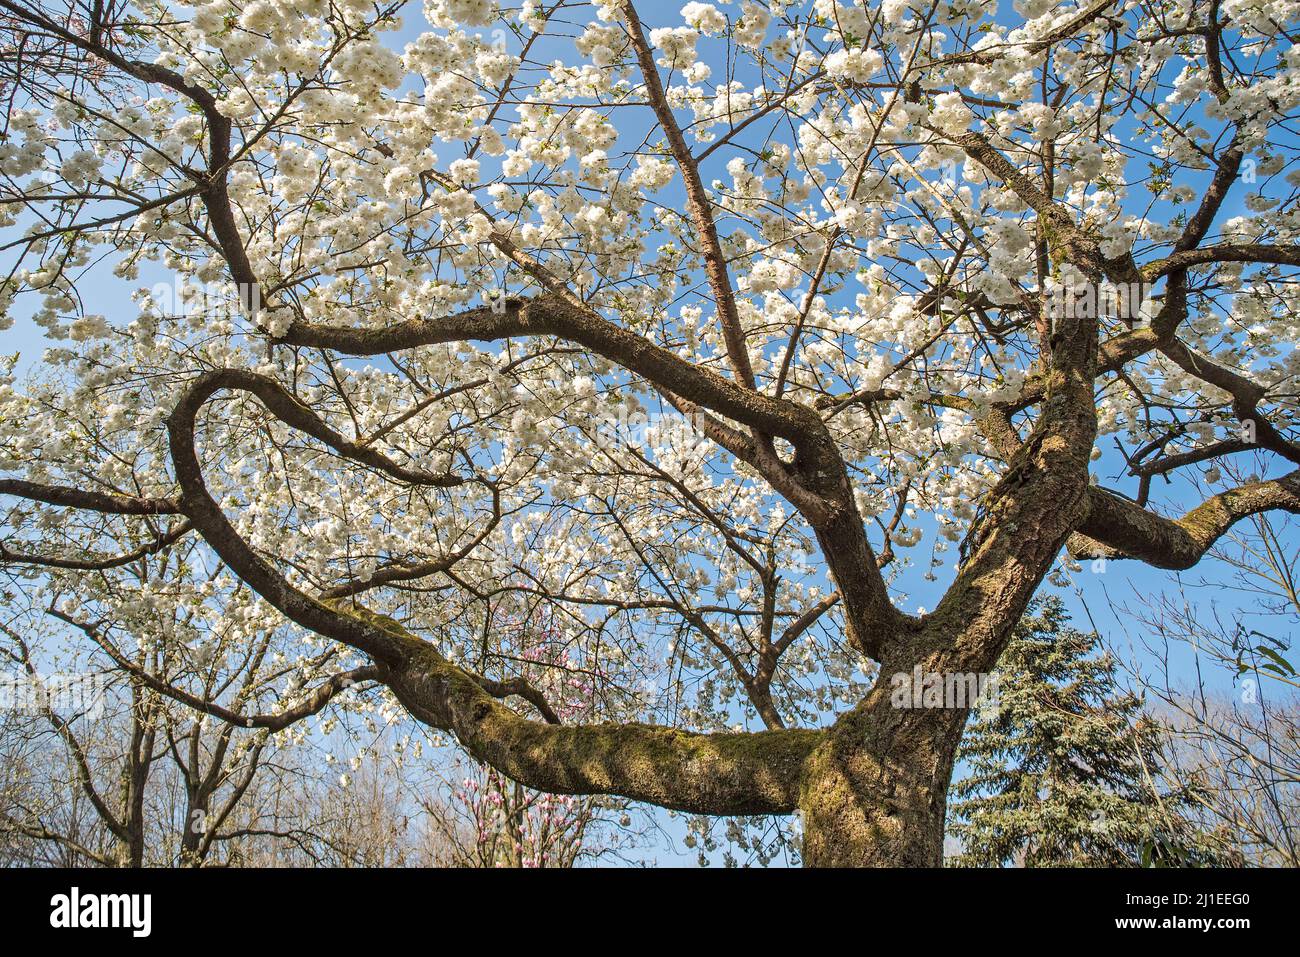 Japanese cherry tree (Prunus serrulata) blooming in park showing white flowers flowering in early spring. Native to Japan, China, Korea and Russia Stock Photo